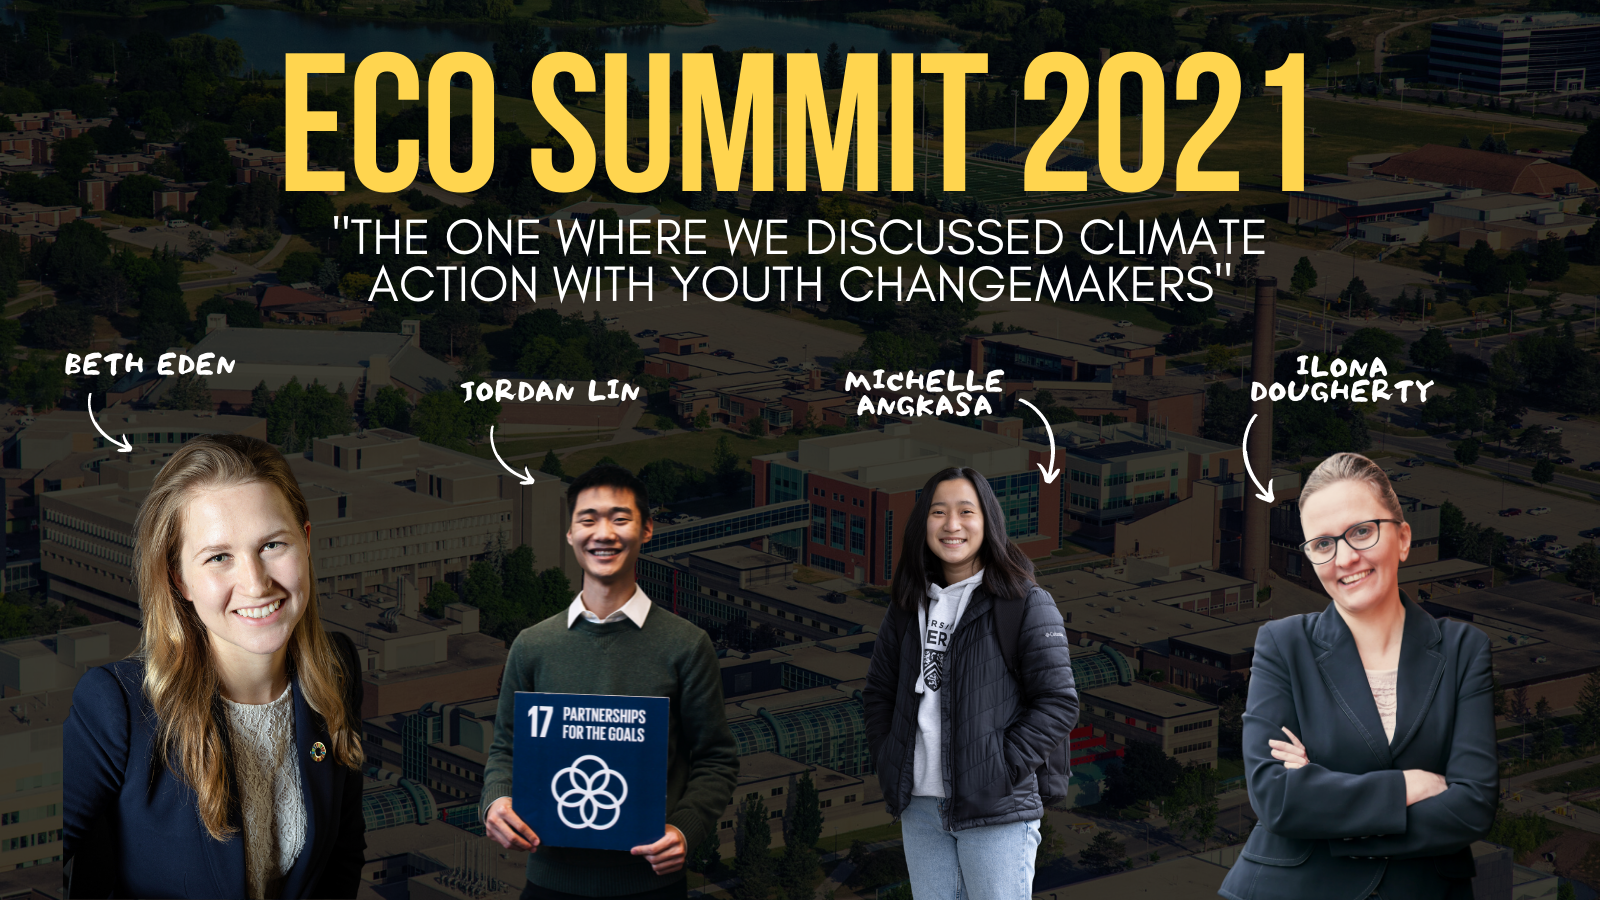 An image with pictures of four panelists and a text that says "Eco Summit 2021: The One Where We Discussed Climate Action with Youth Changemakers"